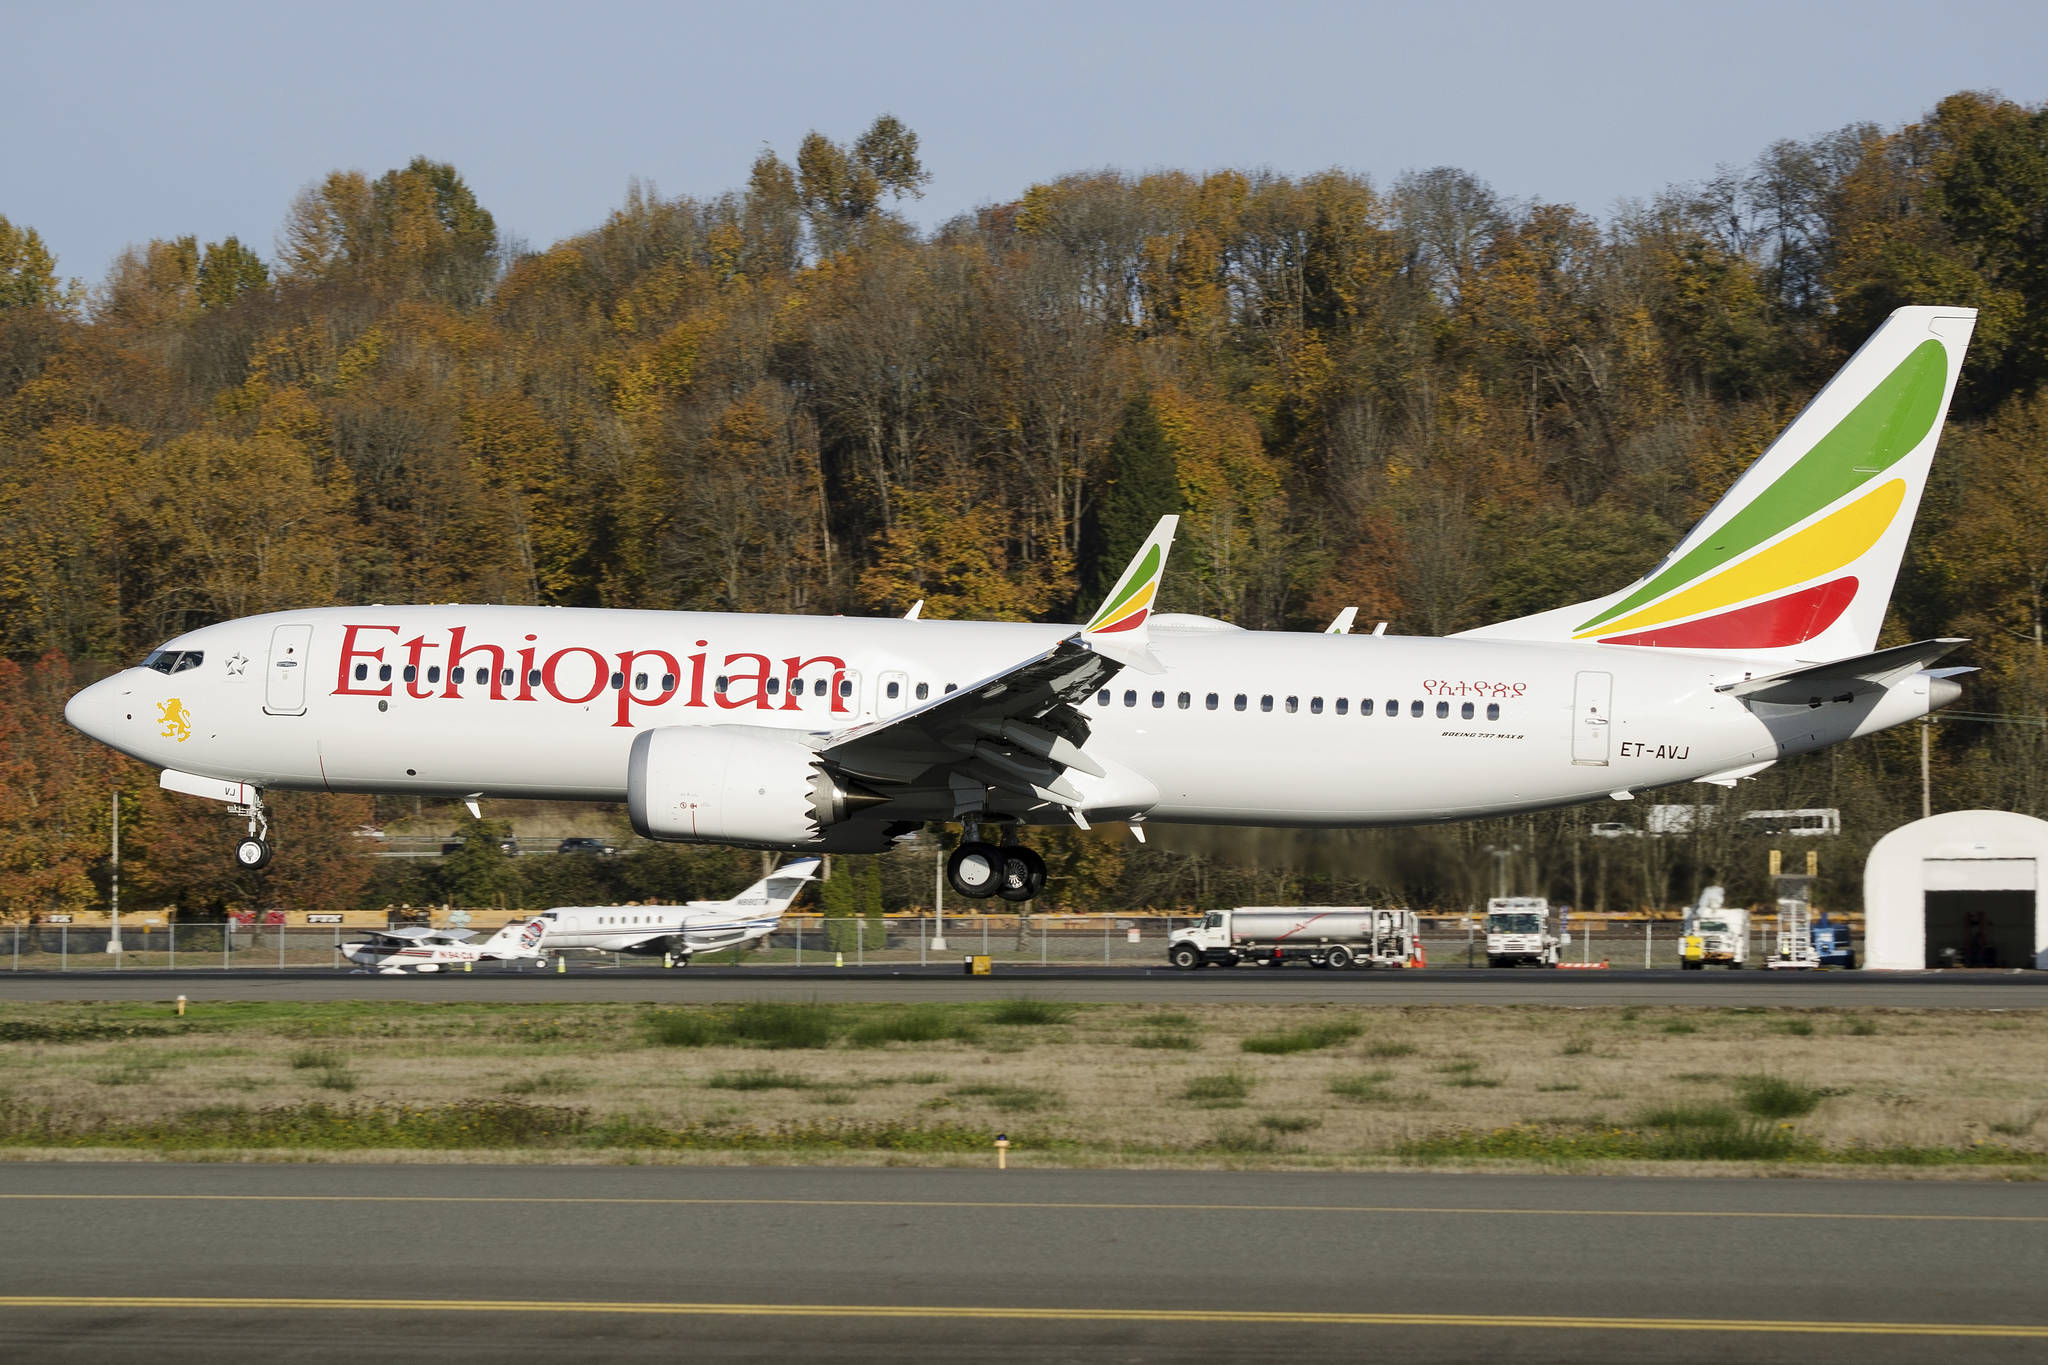 In this photo dated November 12, 2018, the actual Ethiopian Airlines Boeing 737 - Max 8 plane, that crashed Sunday March 10, 2019, shortly after take-off from Addis Ababa, Ethiopia, shown as it lands at Seattle Boeing Field King County International airport, USA. U.S. aviation experts on Tuesday March 12, 2019, joined the investigation into the crash of this Ethiopian Airlines jetliner that killed 157 people, as questions grow about the new Boeing plane involved in the crash. (AP Photo/Preston Fiedler)